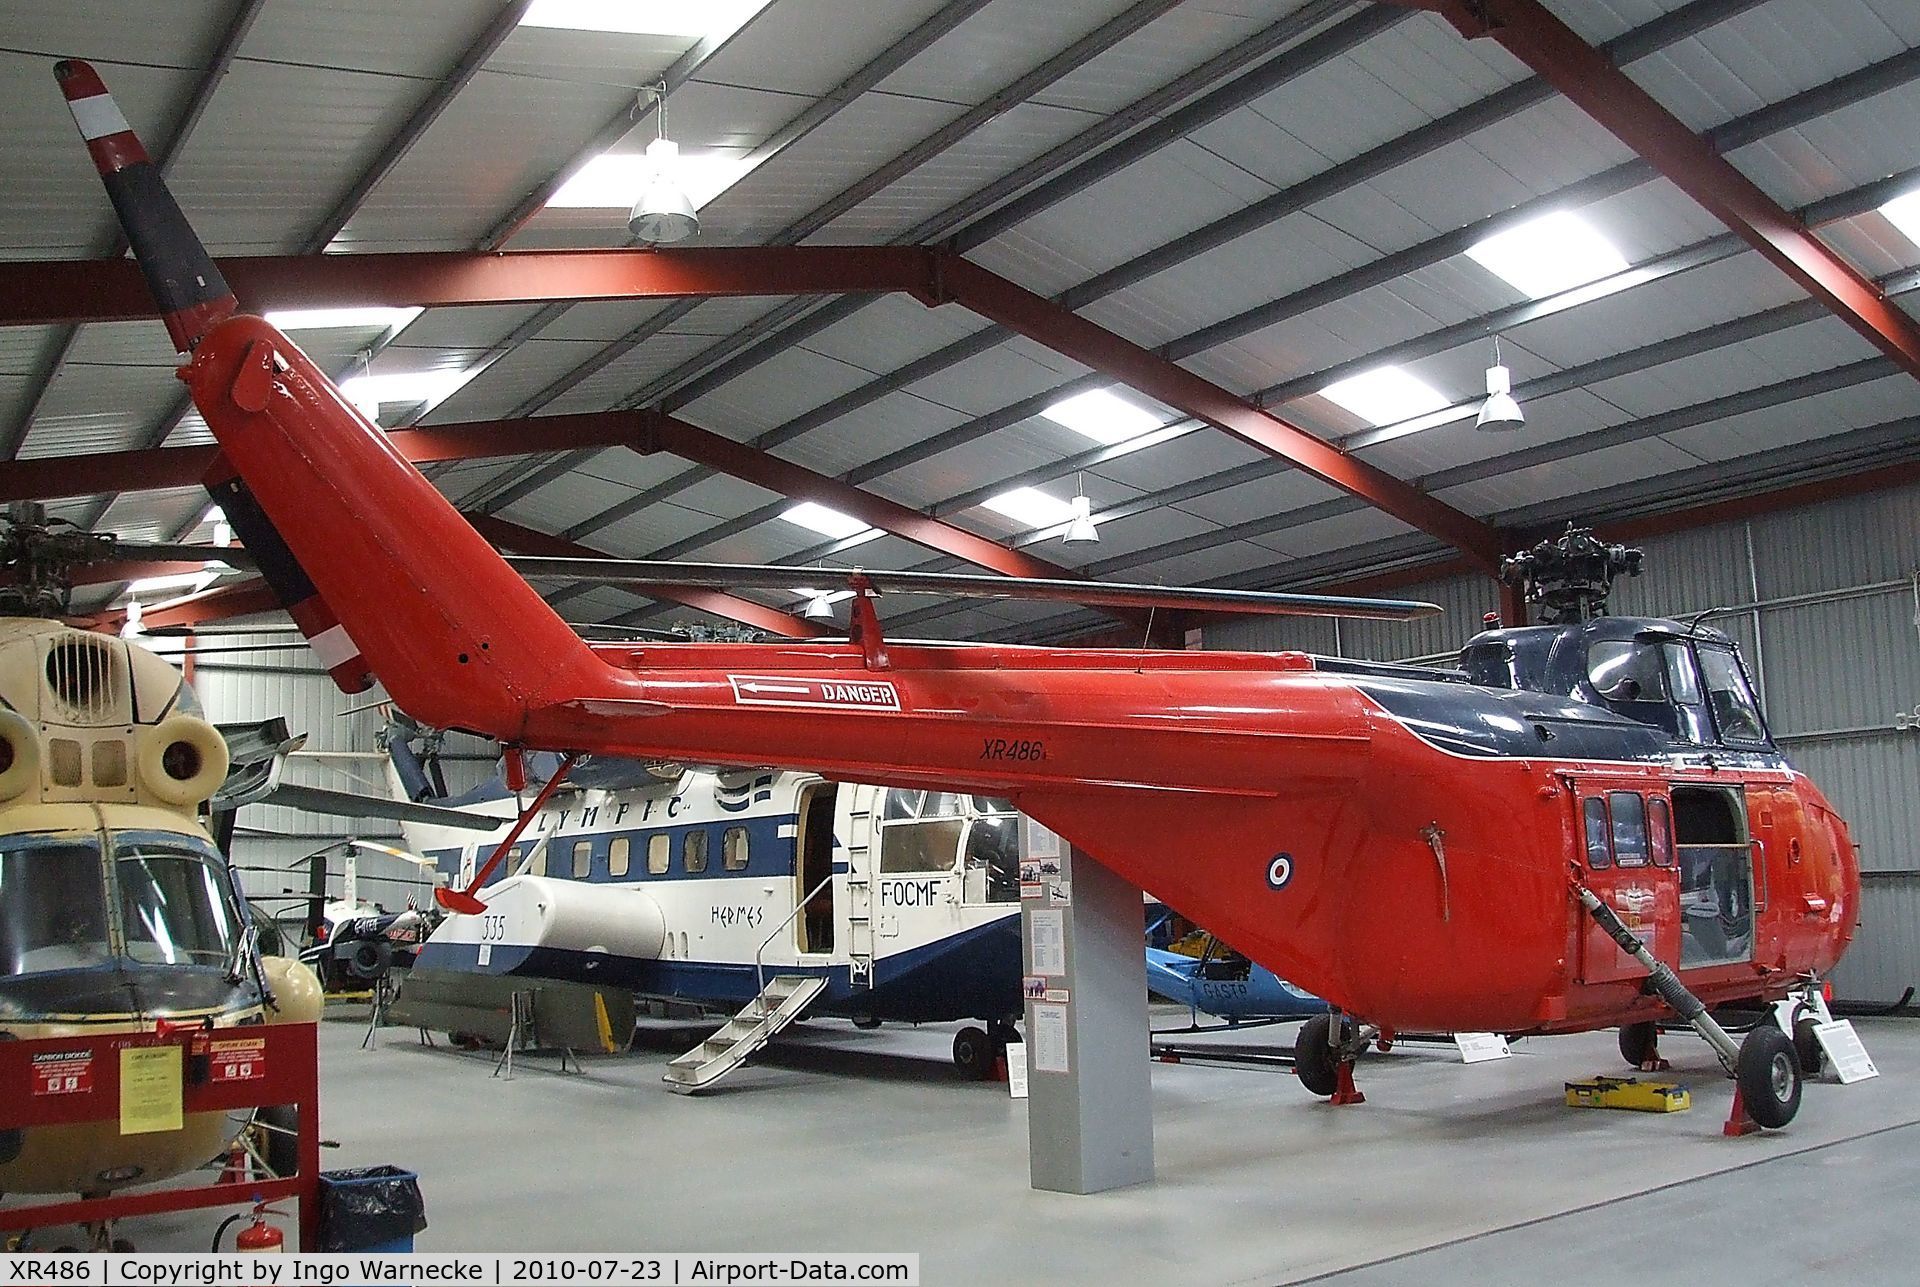 XR486, 1964 Westland Whirlwind HCC.12 C/N WA418, Westland Whirlwind HCC12 at the Helicopter Museum, Weston-super-Mare